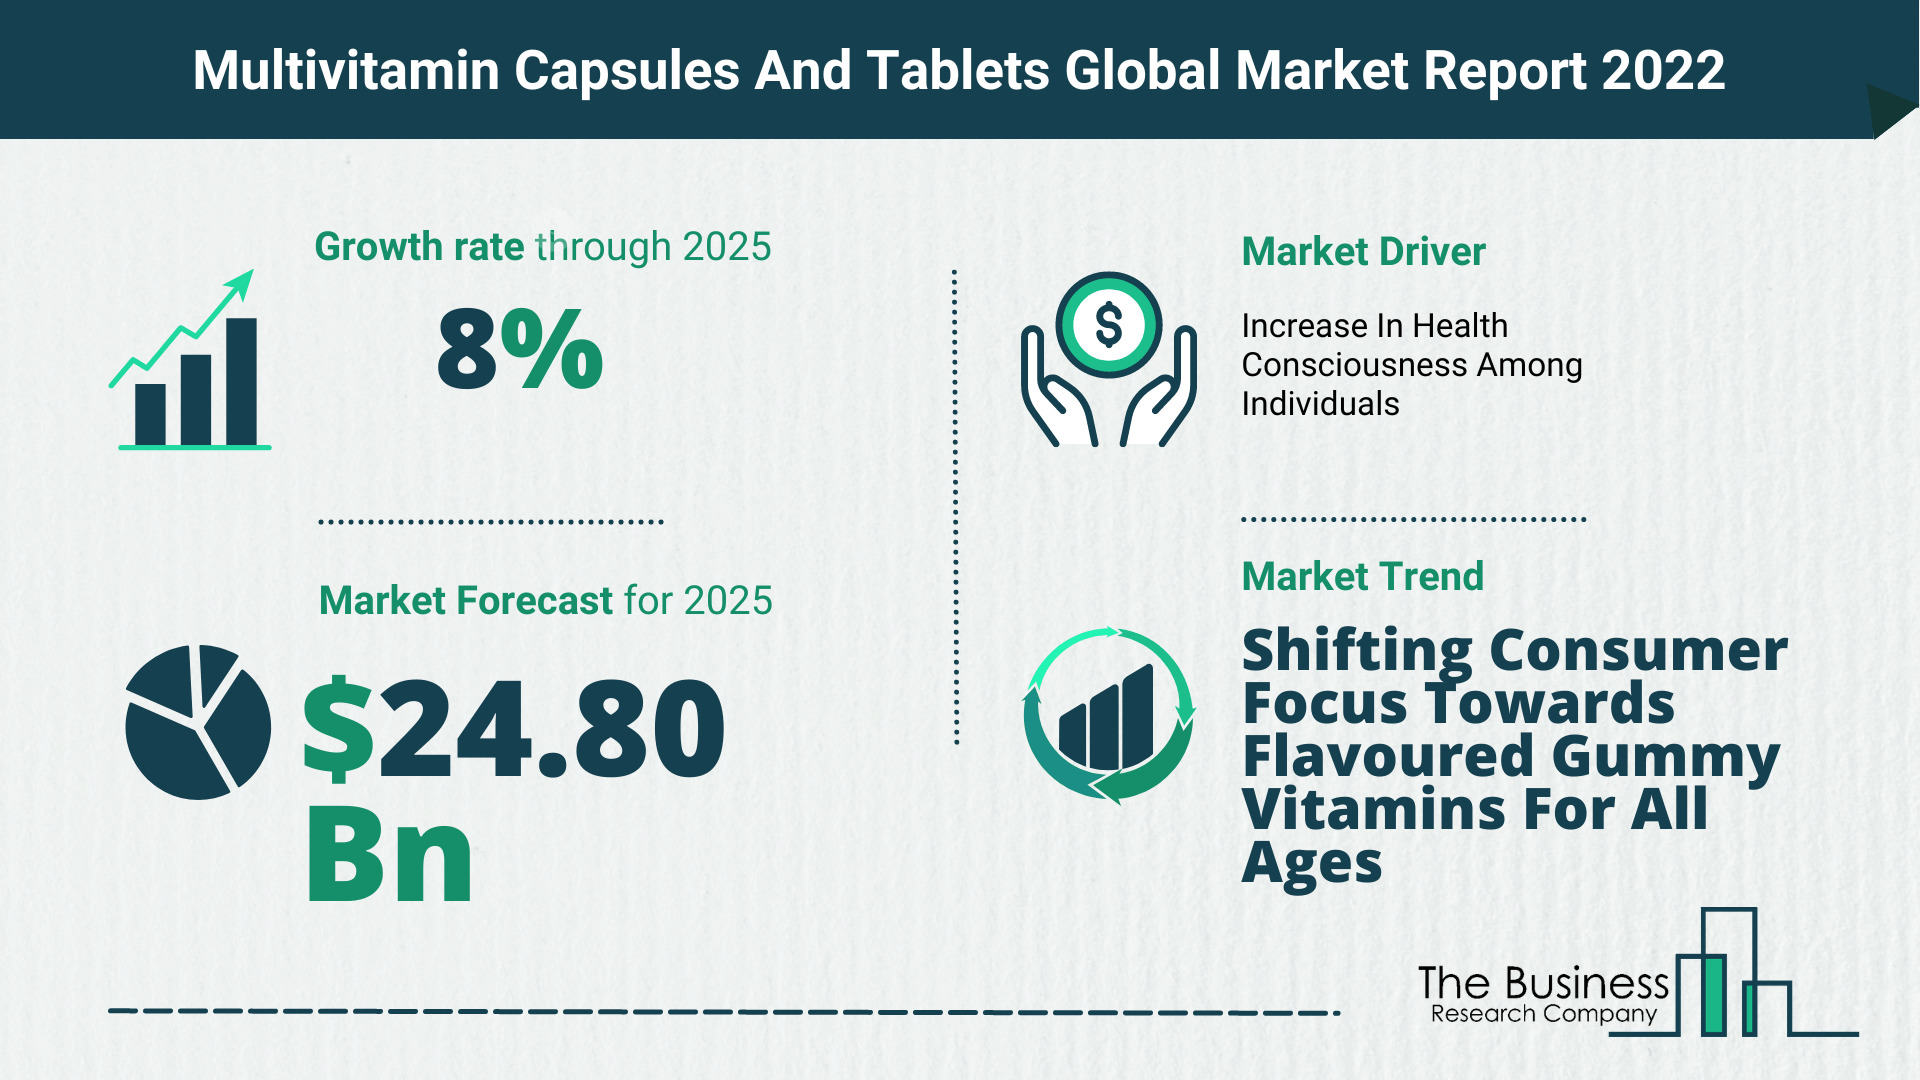 Global Multivitamin Capsules And Tablets Market